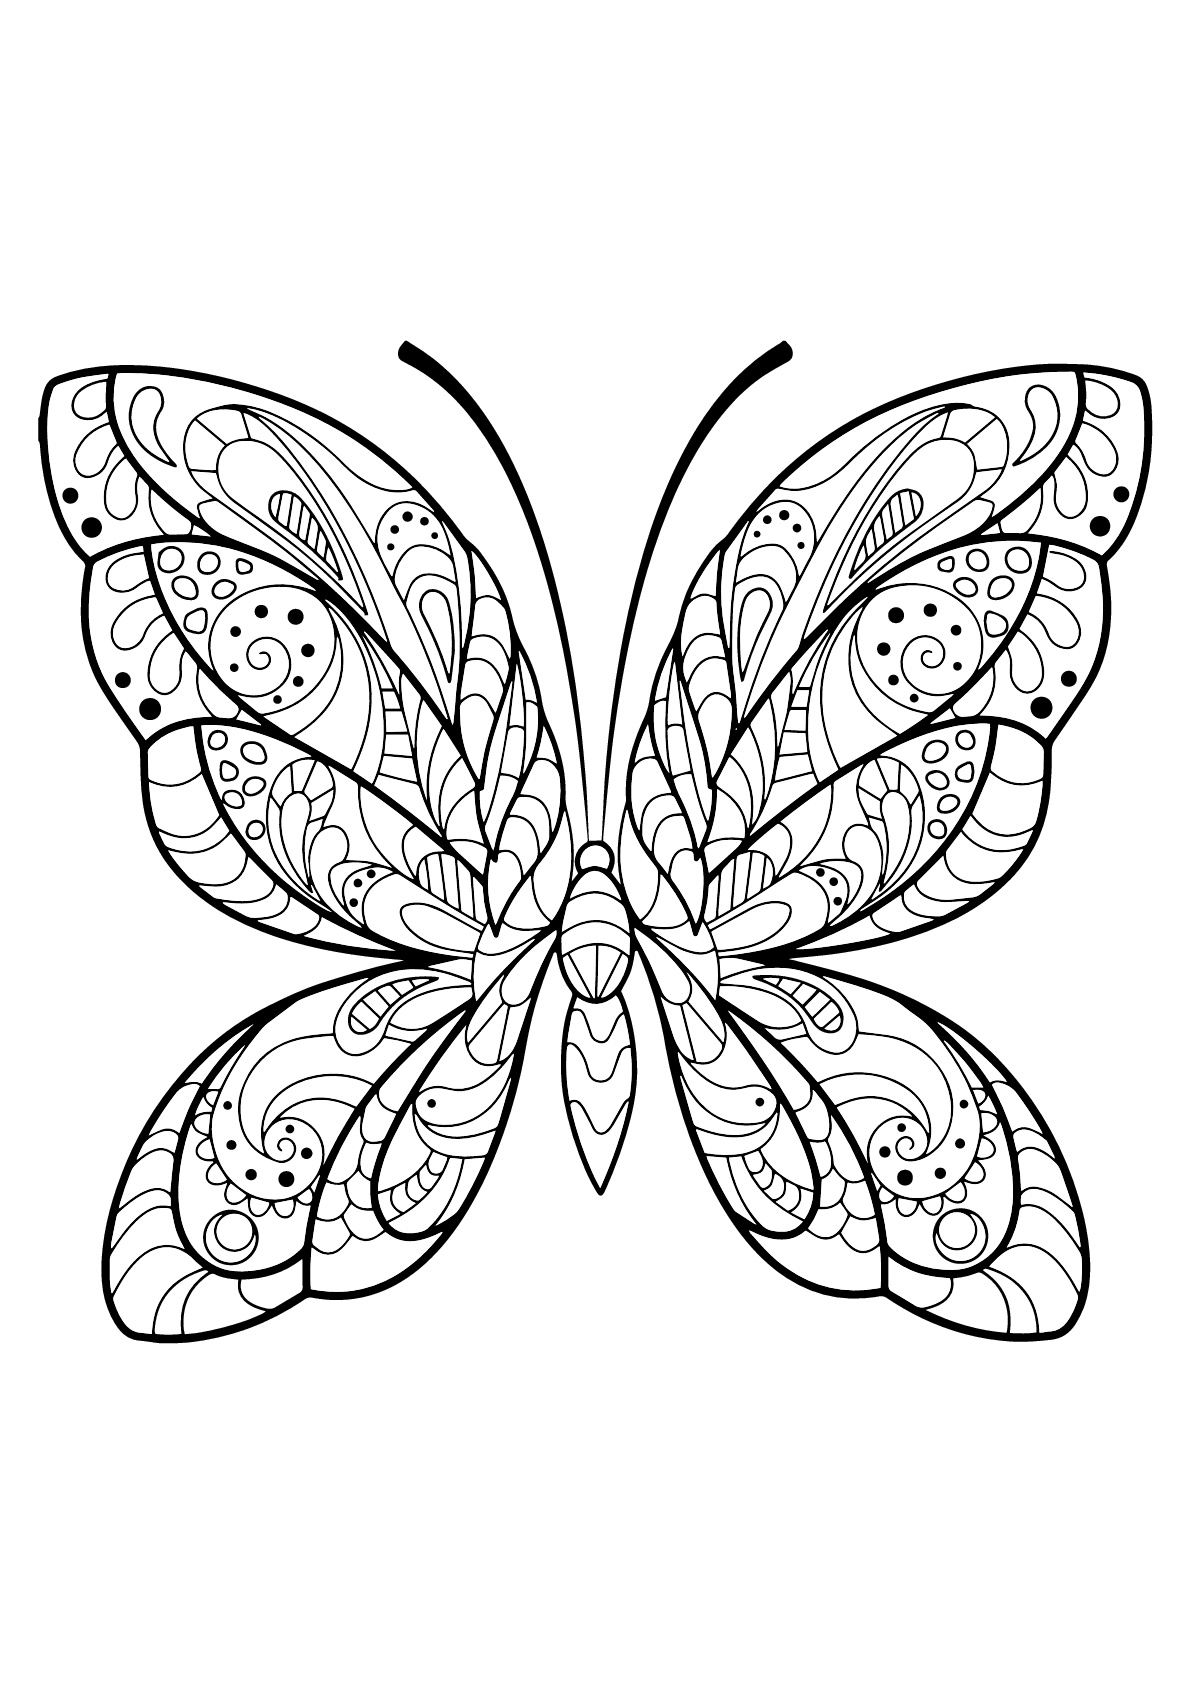 Butterfly beautiful patterns 2 - Butterflies &amp; insects Adult Coloring Pages